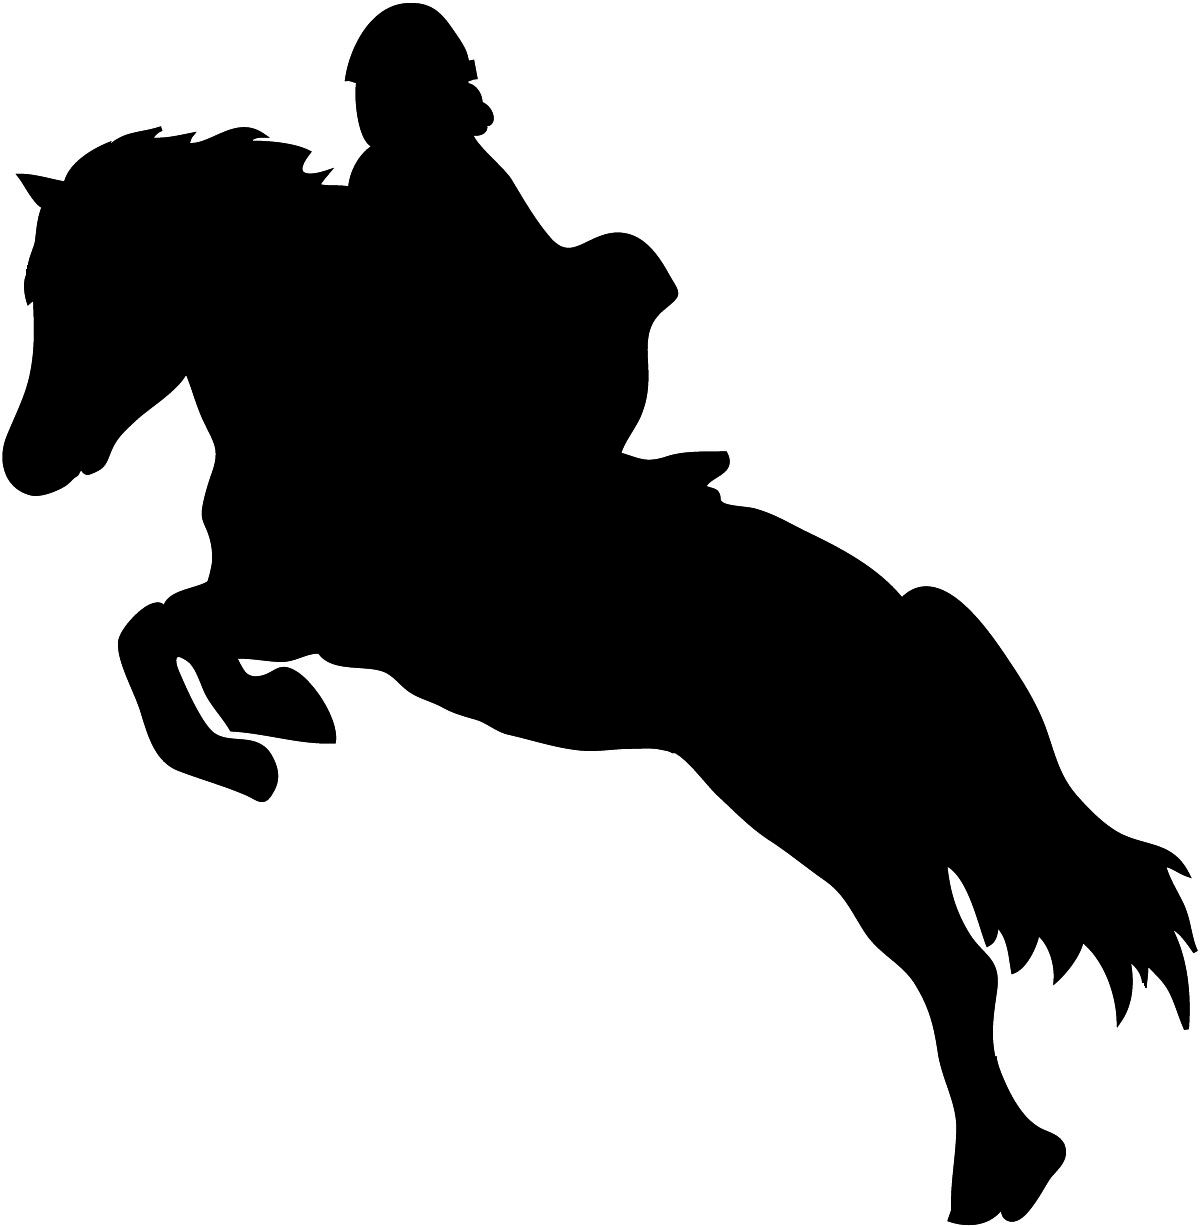 Show jumping horse silhouette with rider.